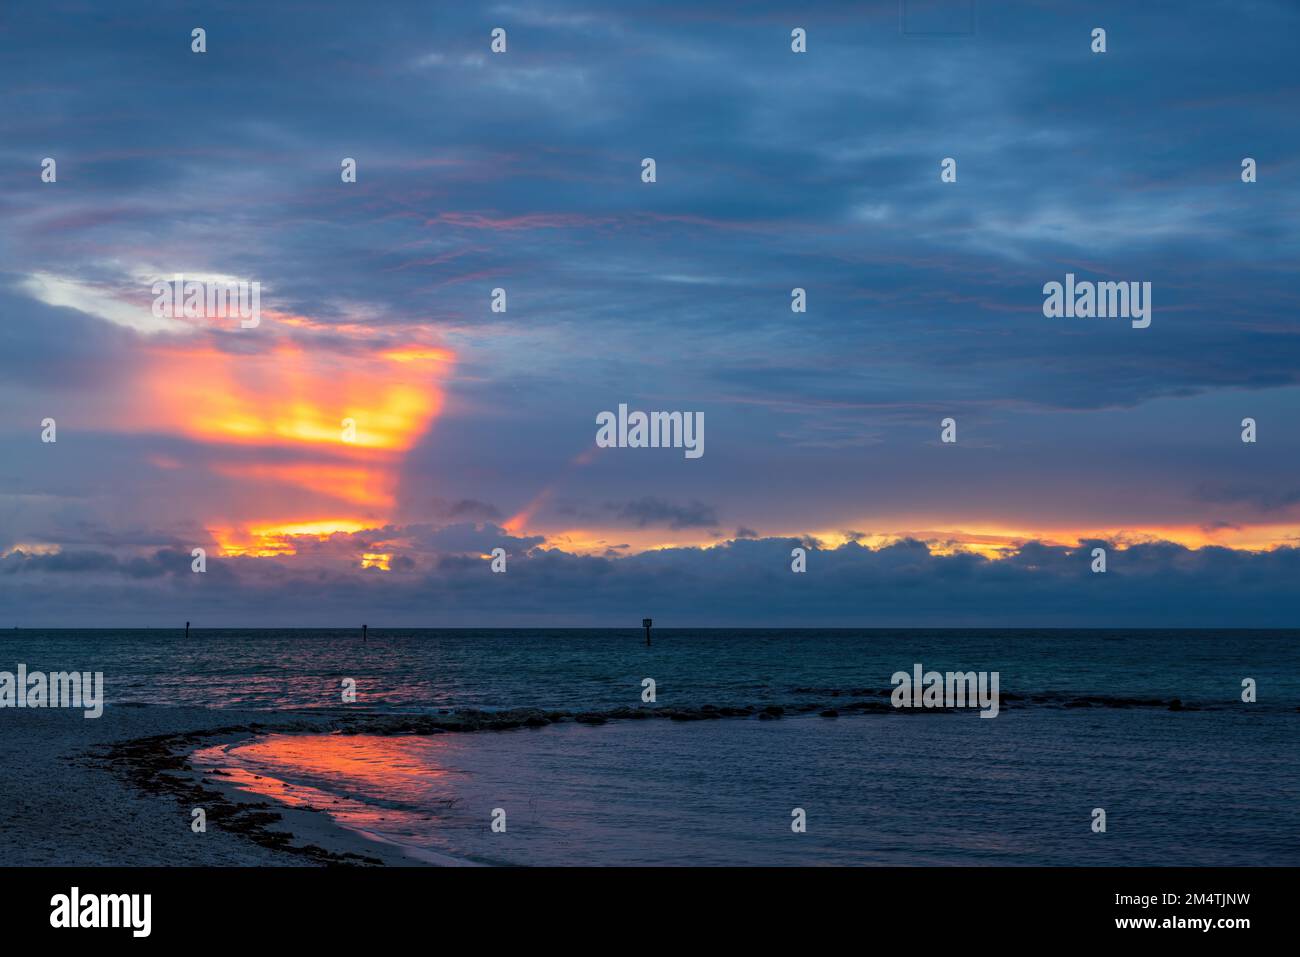 Colourfur sunrise at the Smathers beach in the Key West, Florida. Stock Photo